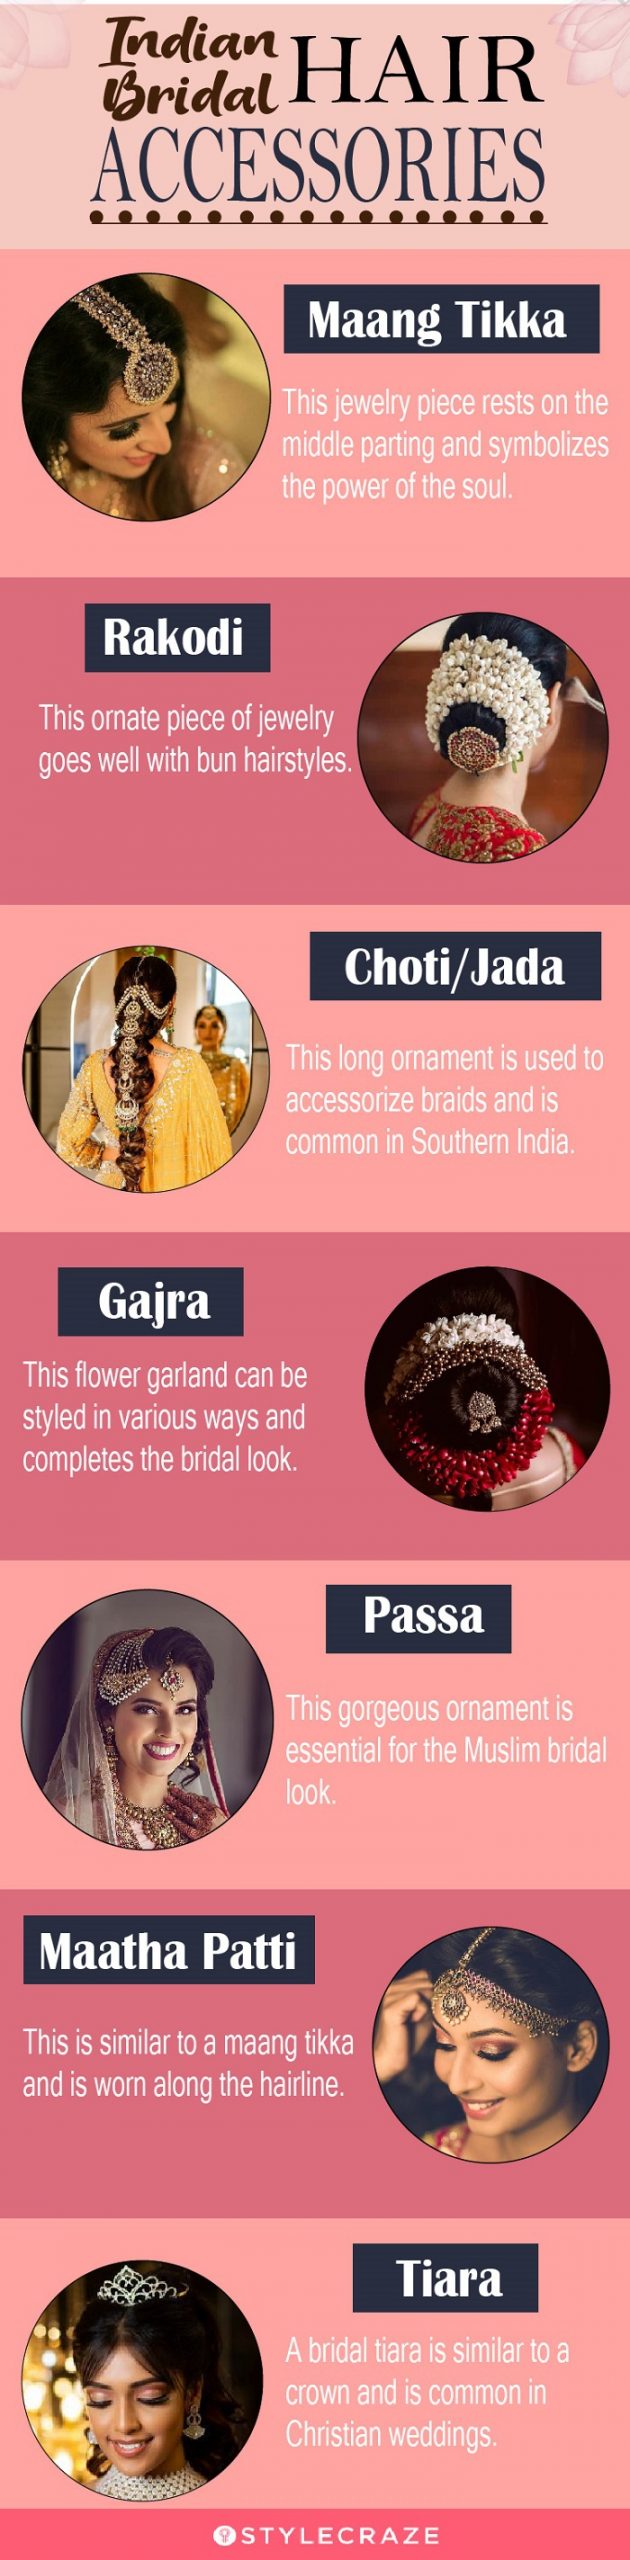 indian bridal hair accessories [infographic]